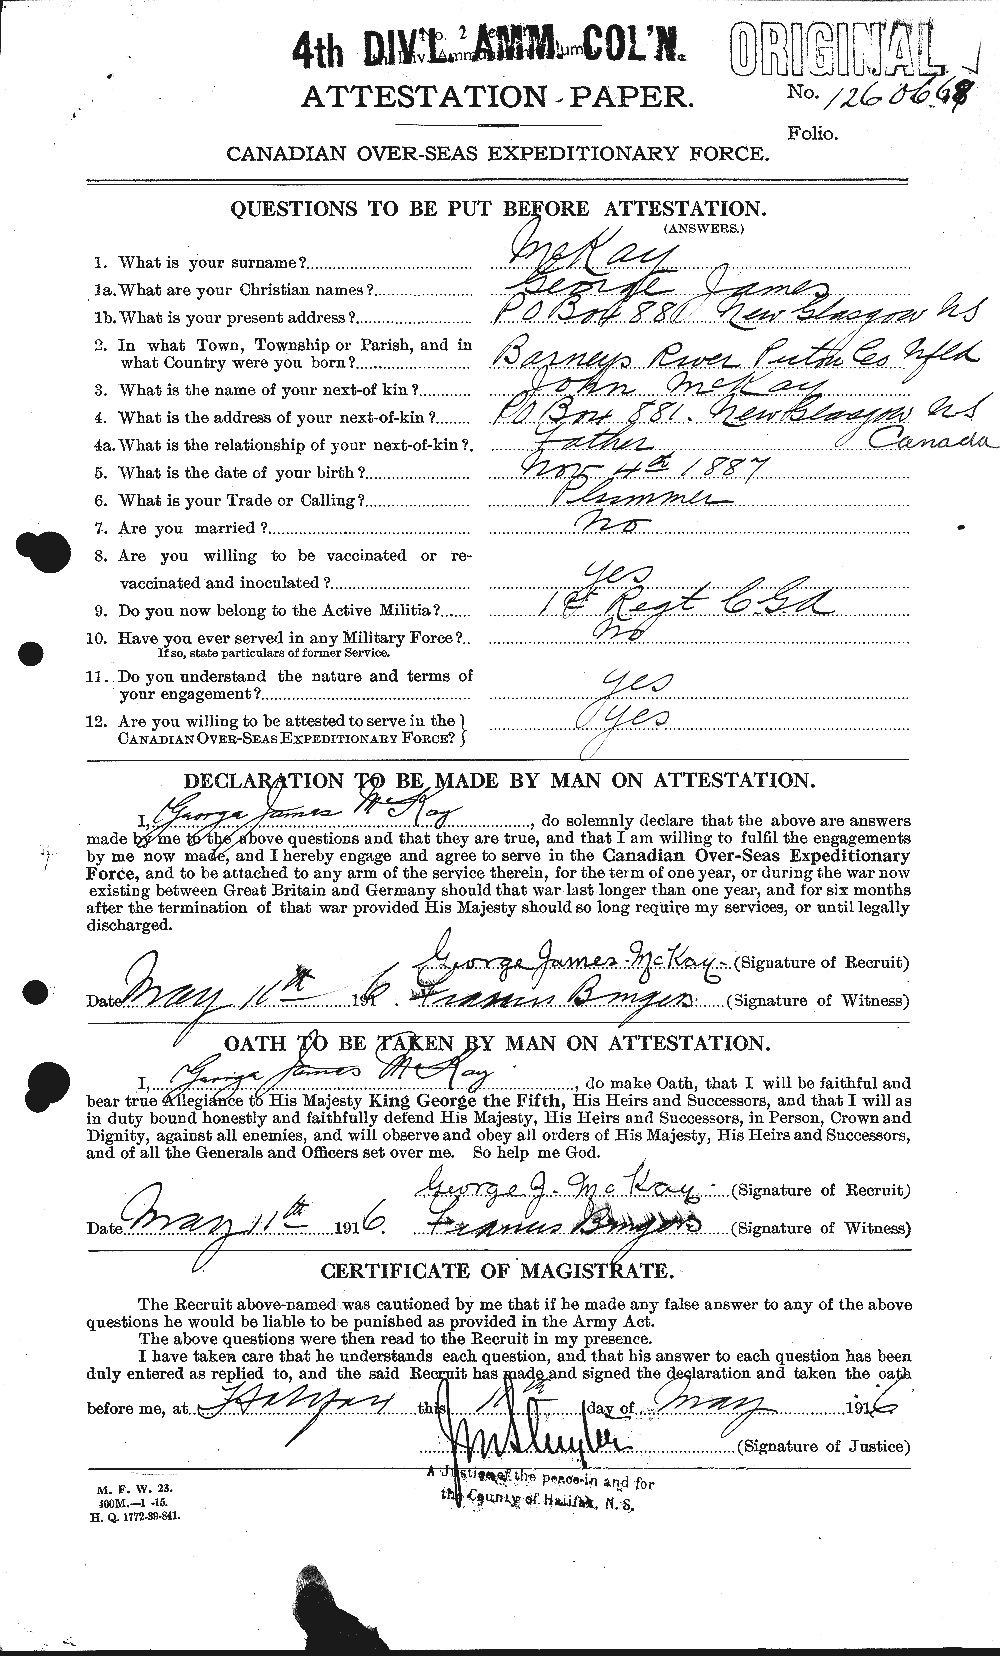 Personnel Records of the First World War - CEF 534683a